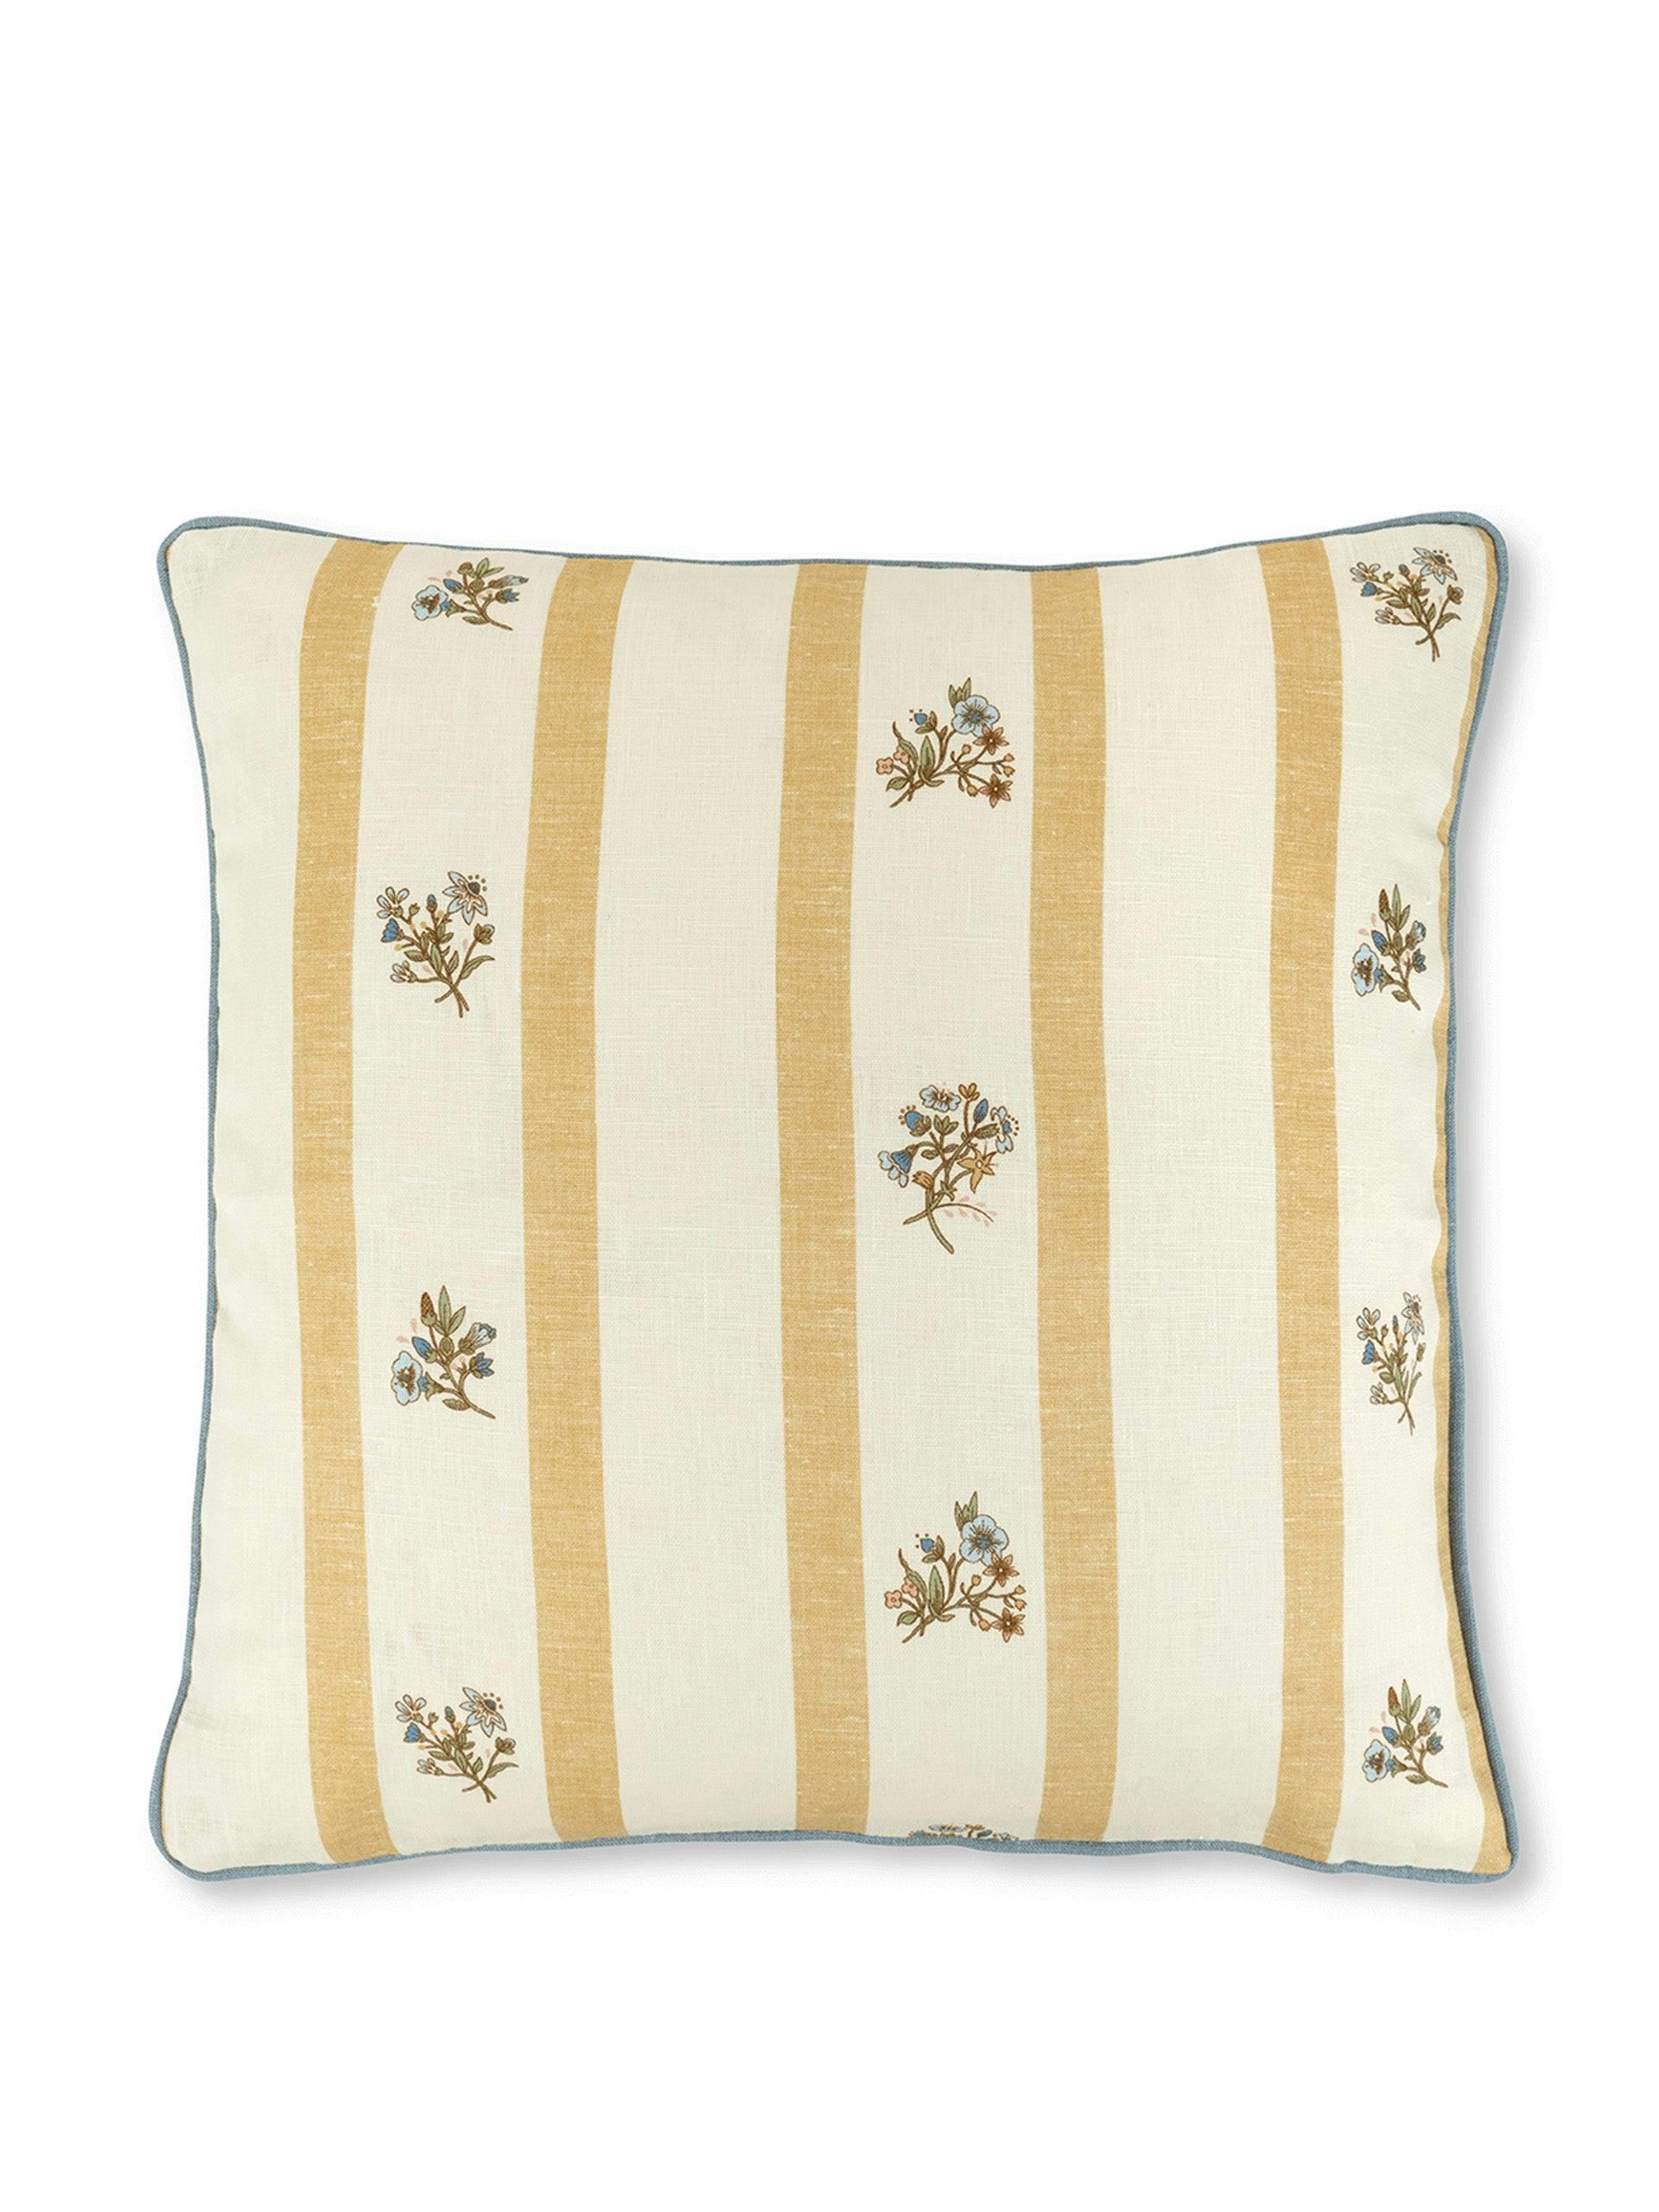 Flax & field posy stripe cushion in ochre with contrast reverse and chambray blue trim